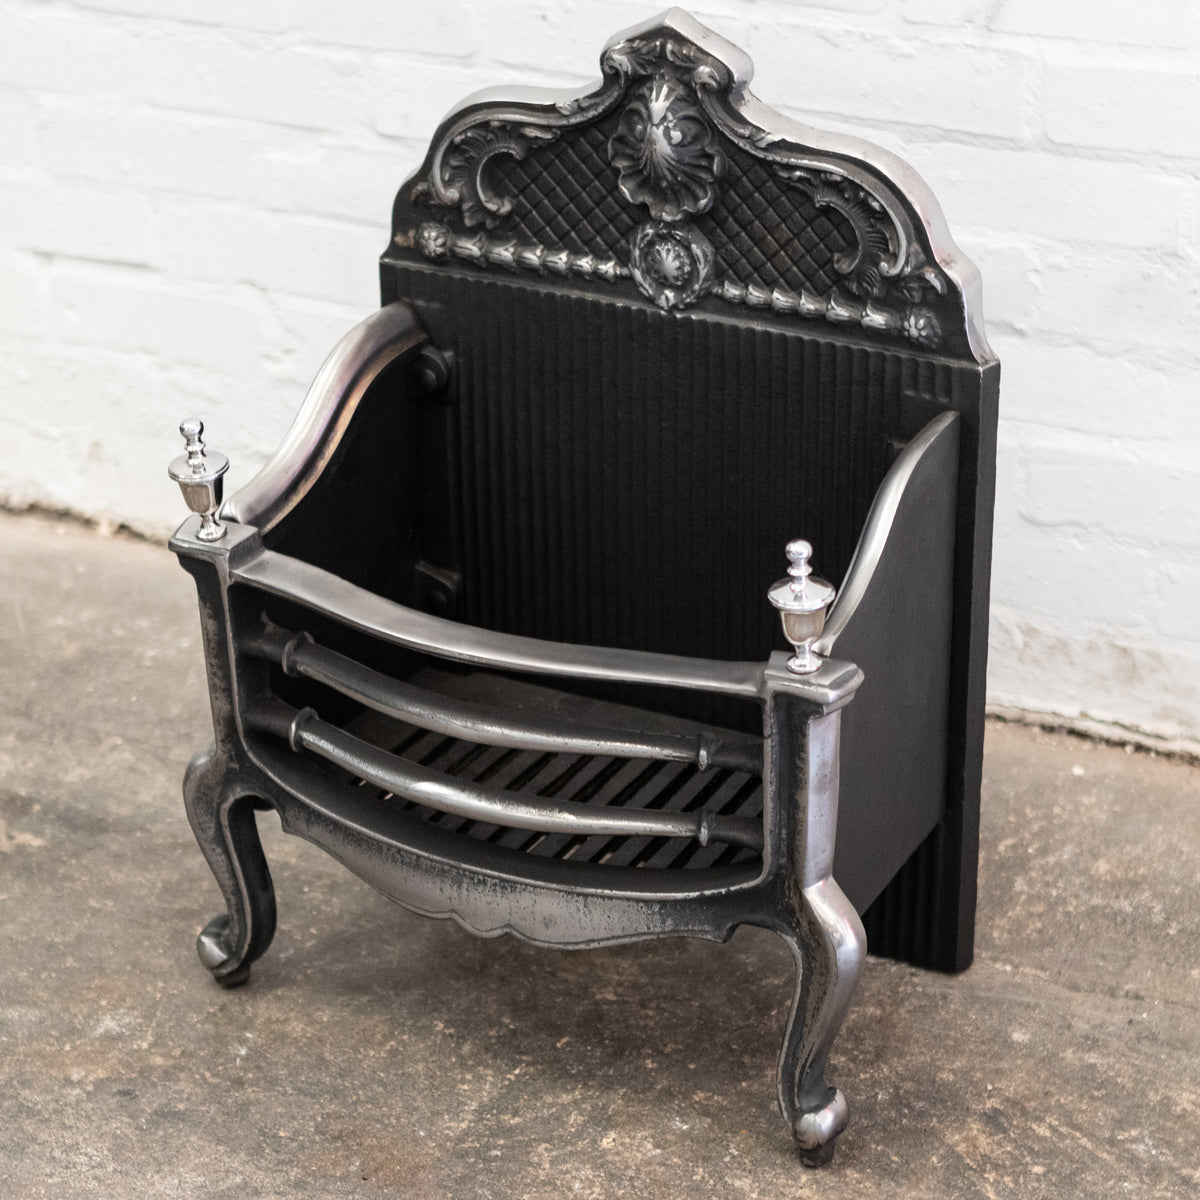 Reclaimed Grand Cast Iron Fire Basket with Finials | The Architectural Forum